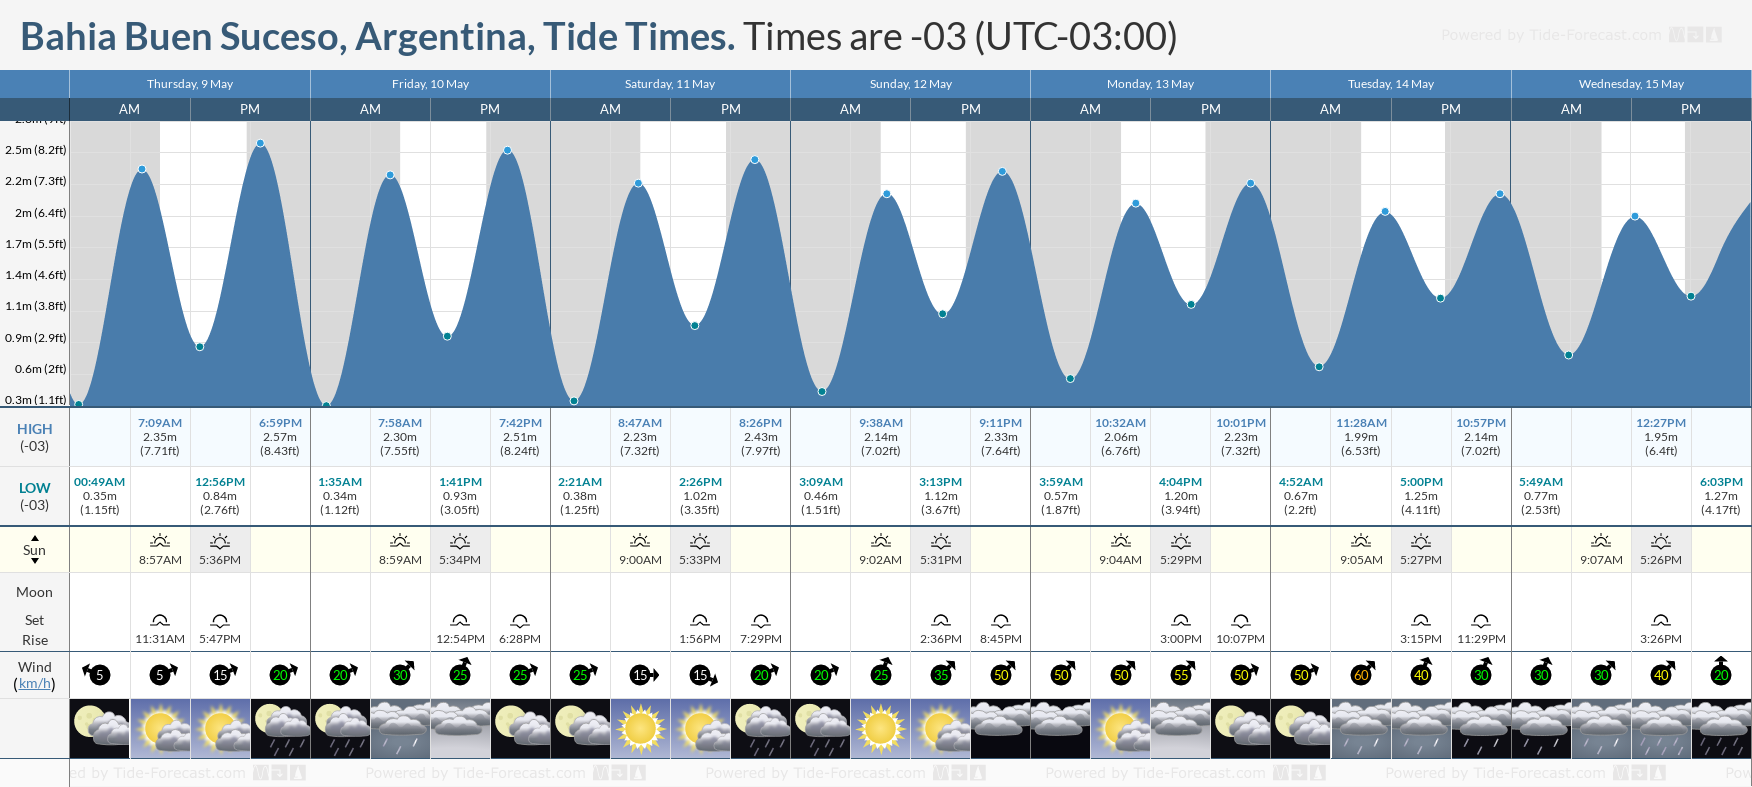 Bahia Buen Suceso, Argentina Tide Chart including high and low tide tide times for the next 7 days